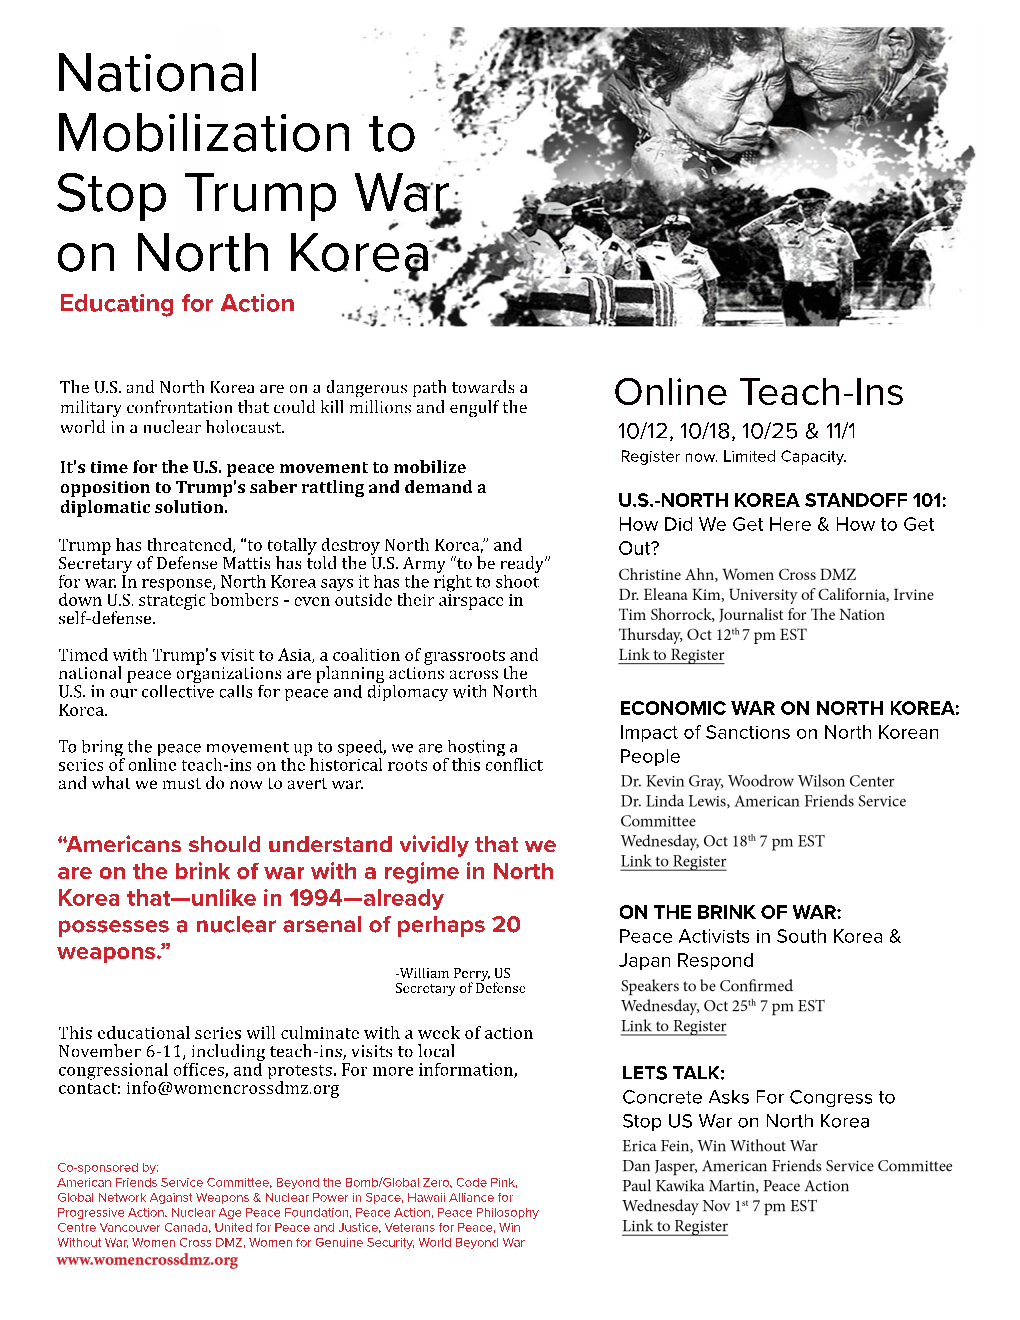 National Mobilization to Stop Trump War on North Korea Educating for Action